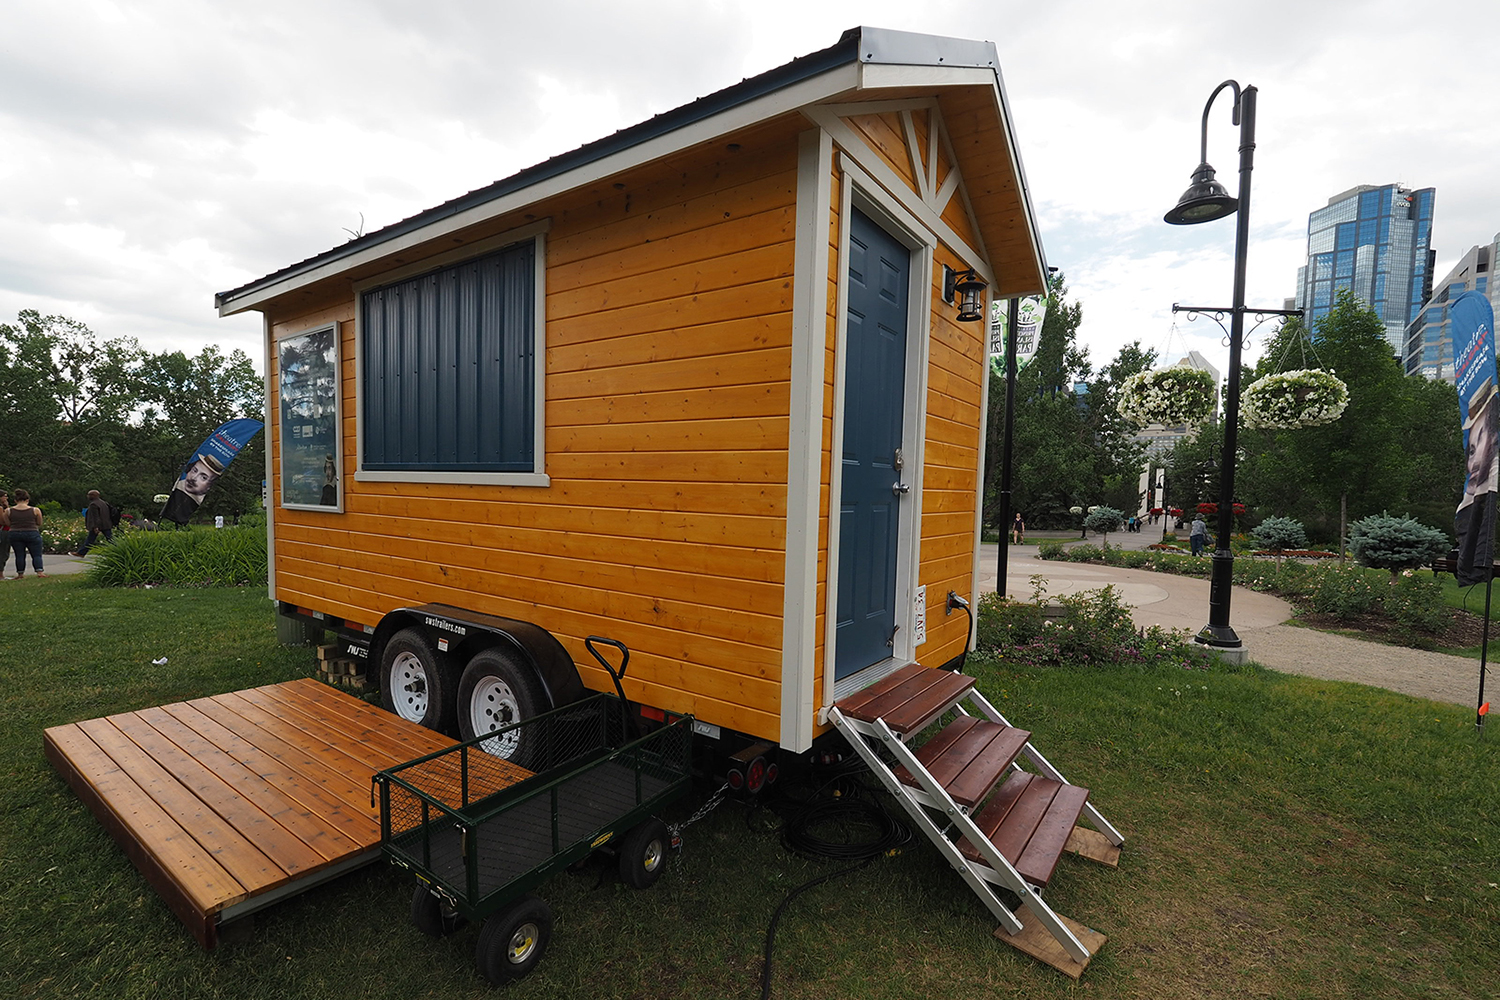 Tiny homes measure between 120 square feet and 420 square feet, and range in price from $50,000 - $100,000.
Courtesy Blackbird Tiny Homes